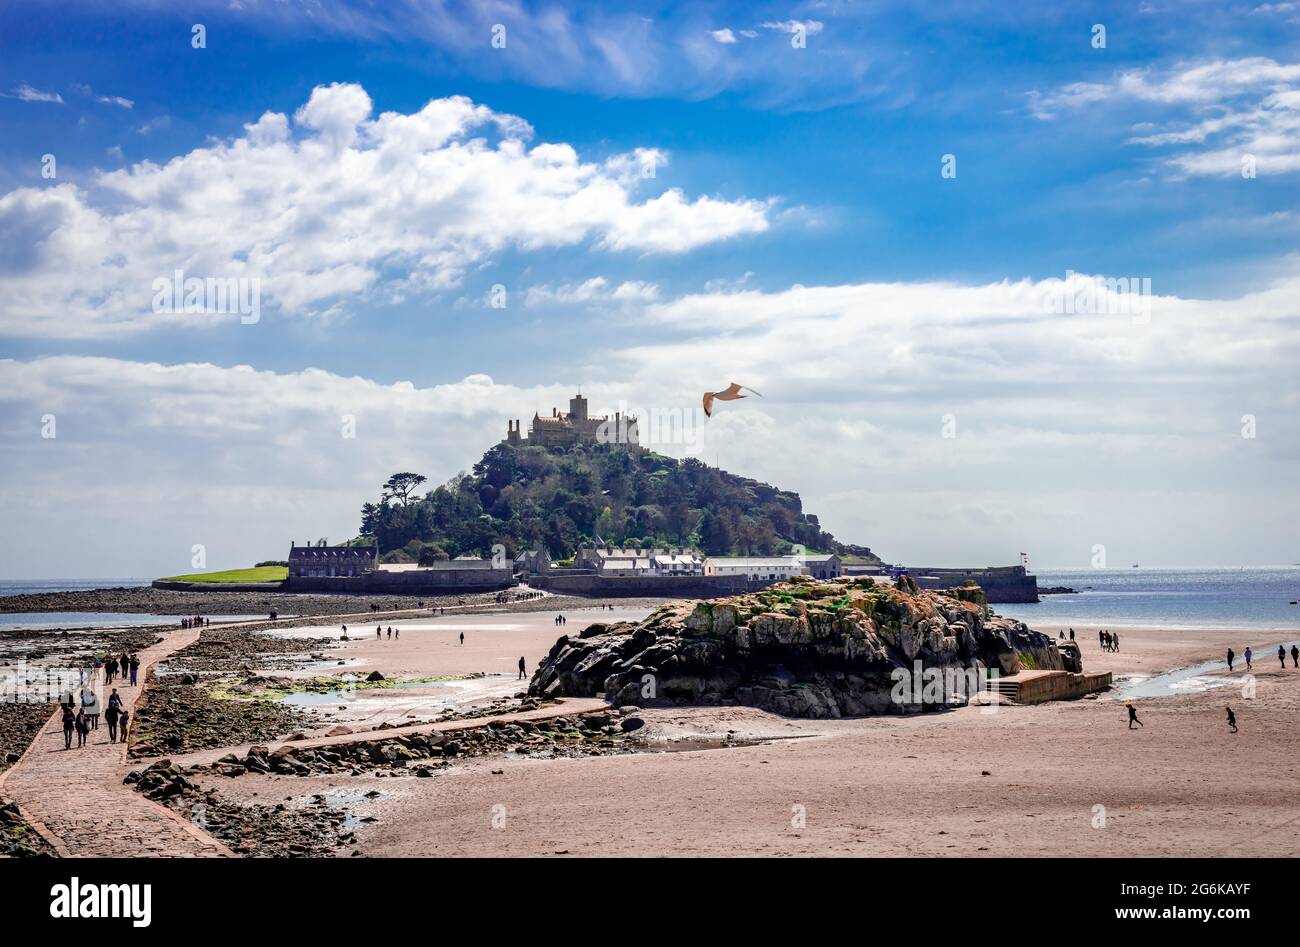 View of the island with the castle on the hill. St Michael's Mount is a tidal island in Mount's Bay, Cornwall, accessible by foot on low tide. Stock Photo